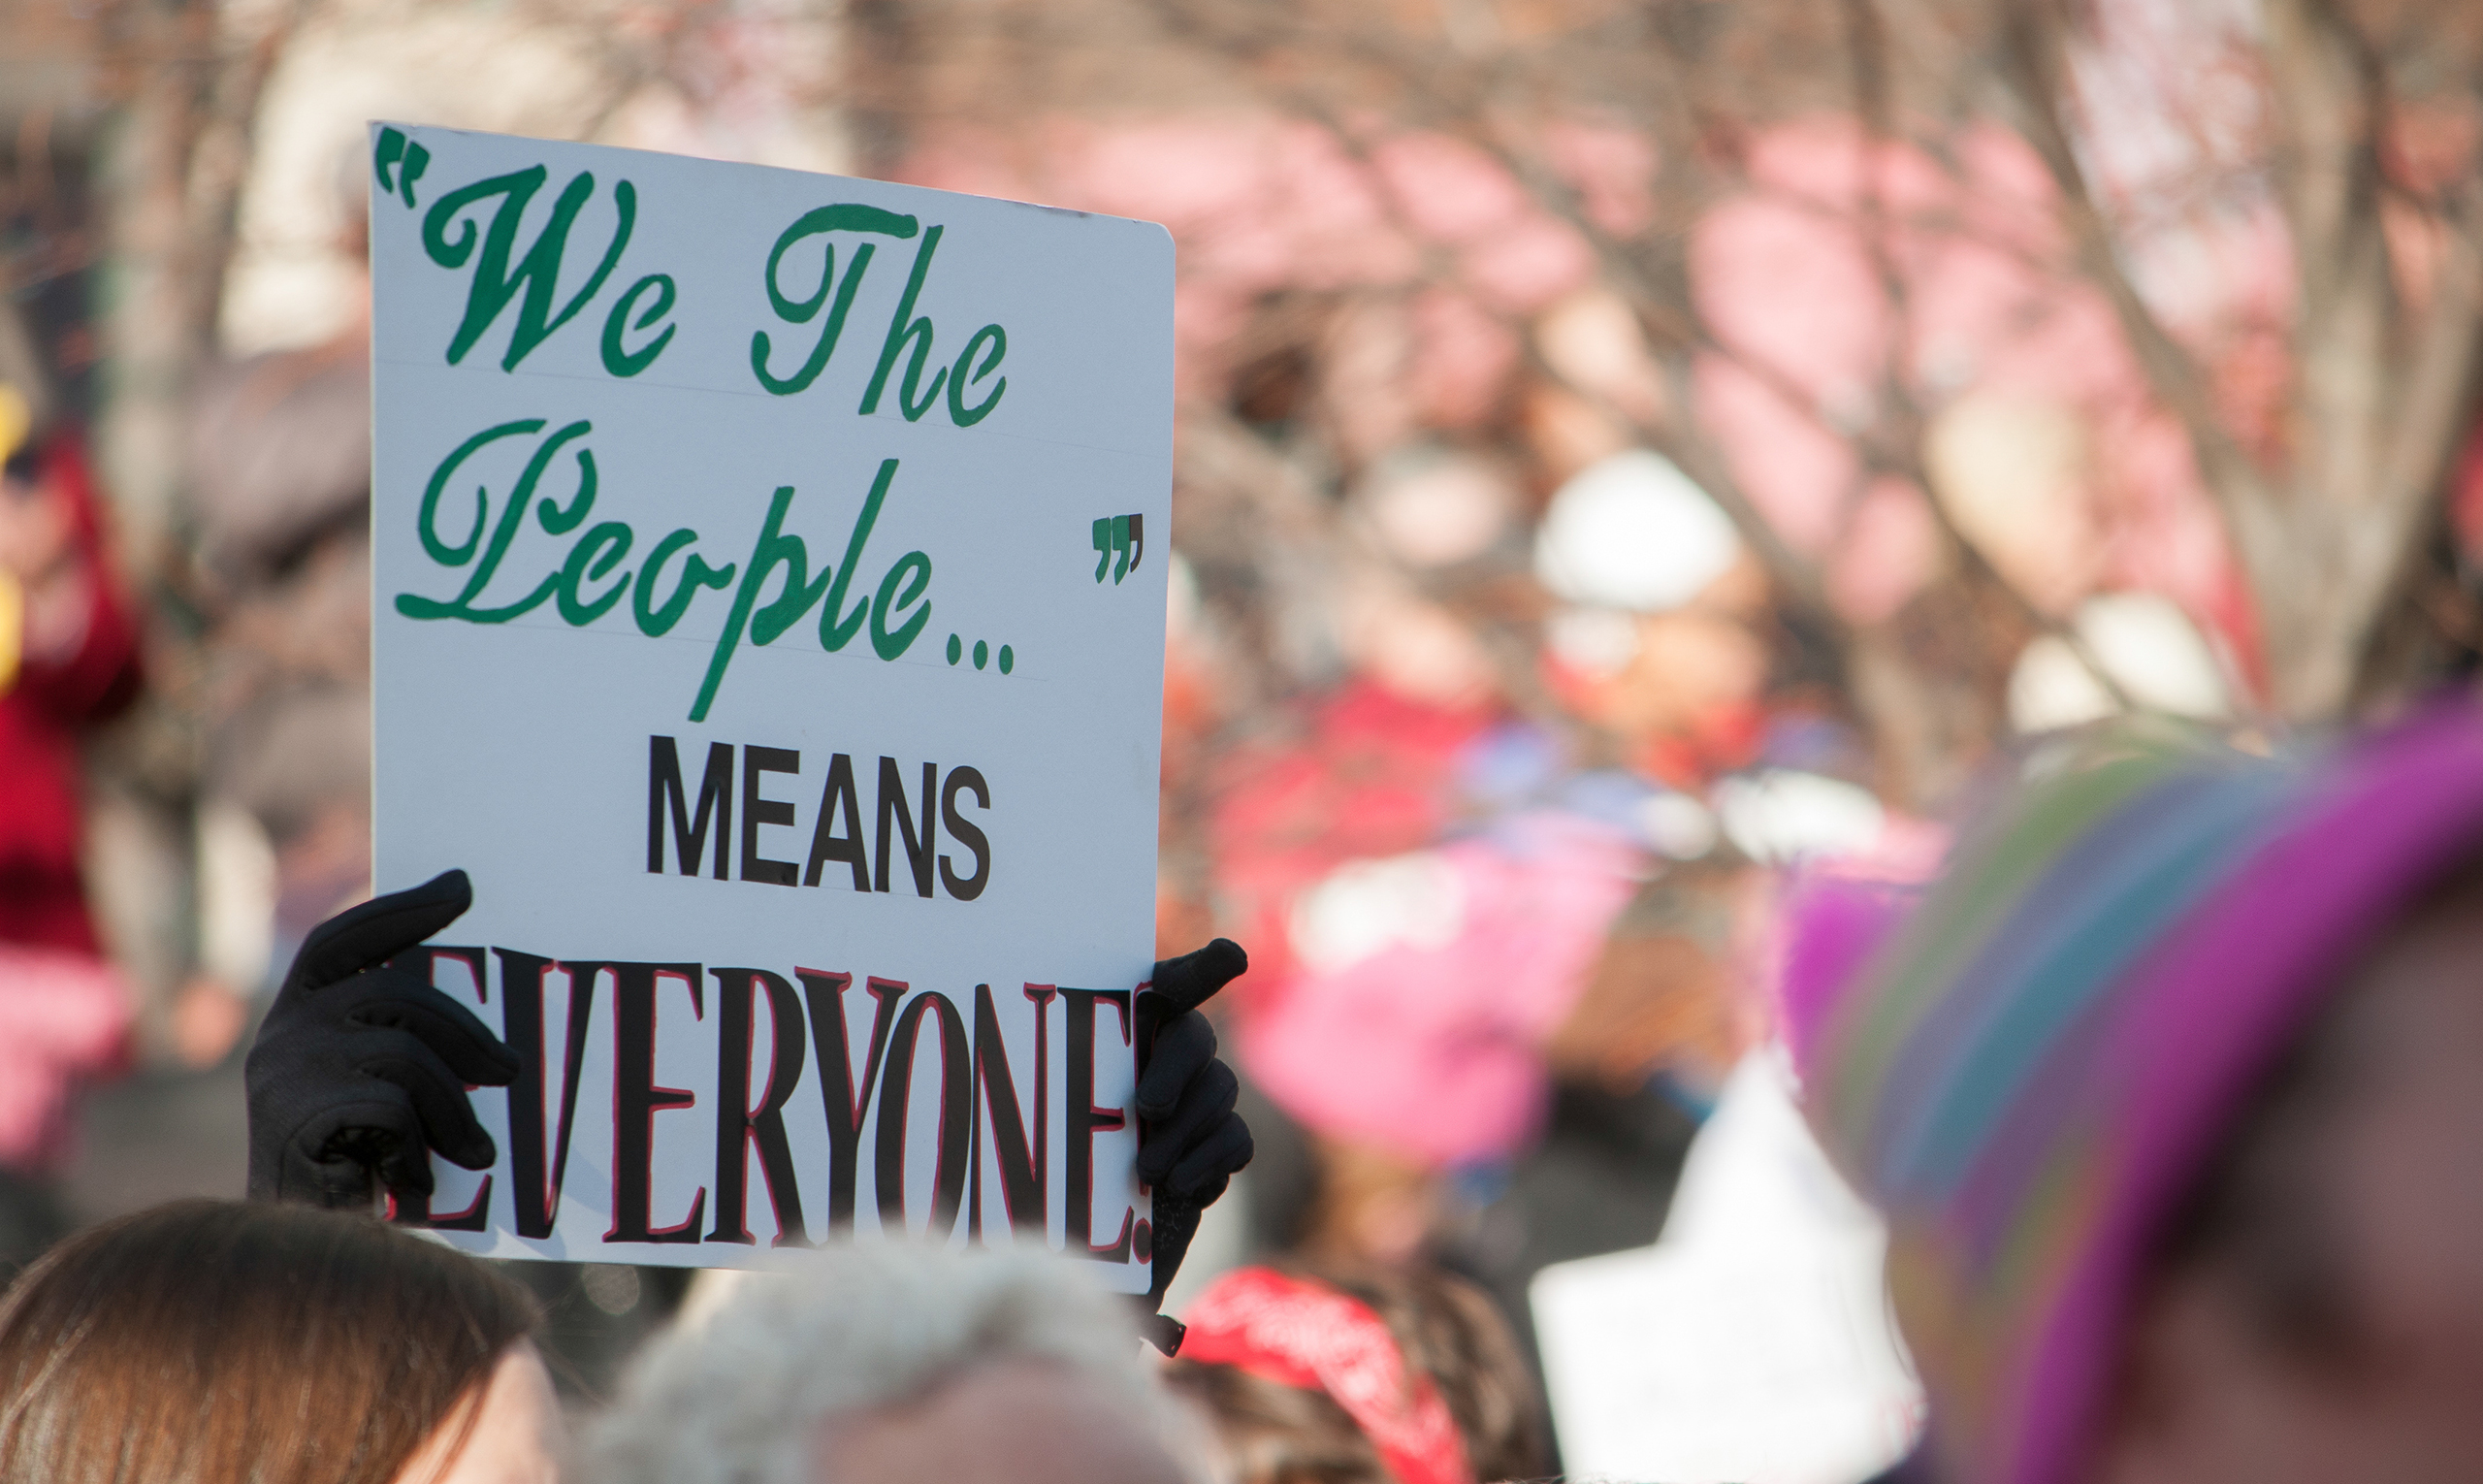 A sign held among a crowd says "'We The People' means everyone"